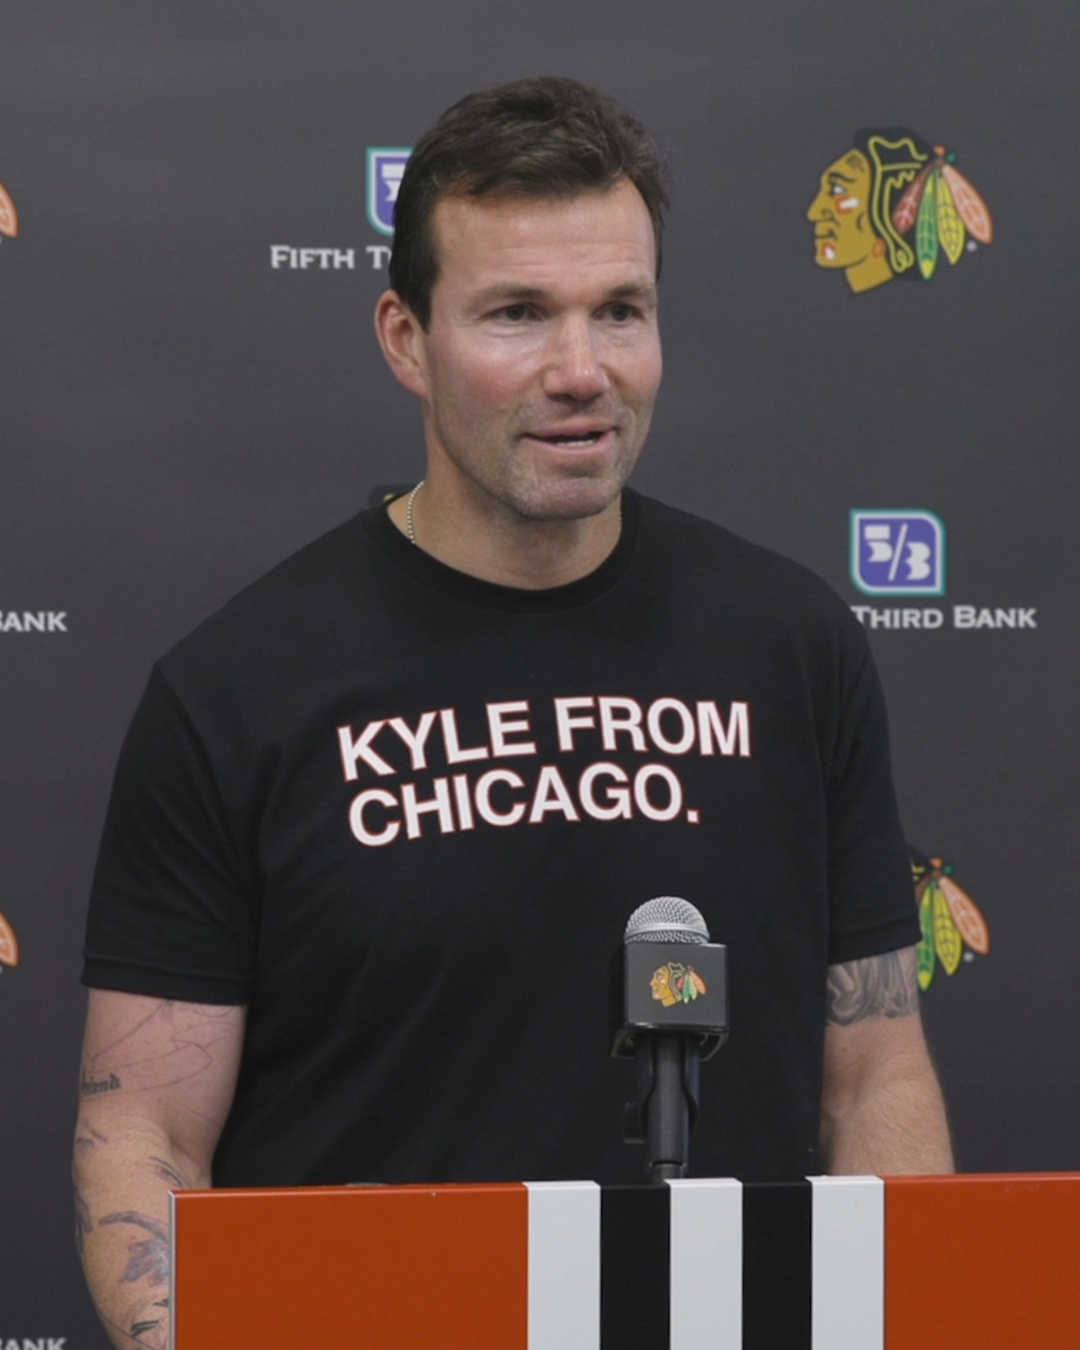 Obvious Shirts Chicago Blackhawks "Kyle from Chicago" Tee